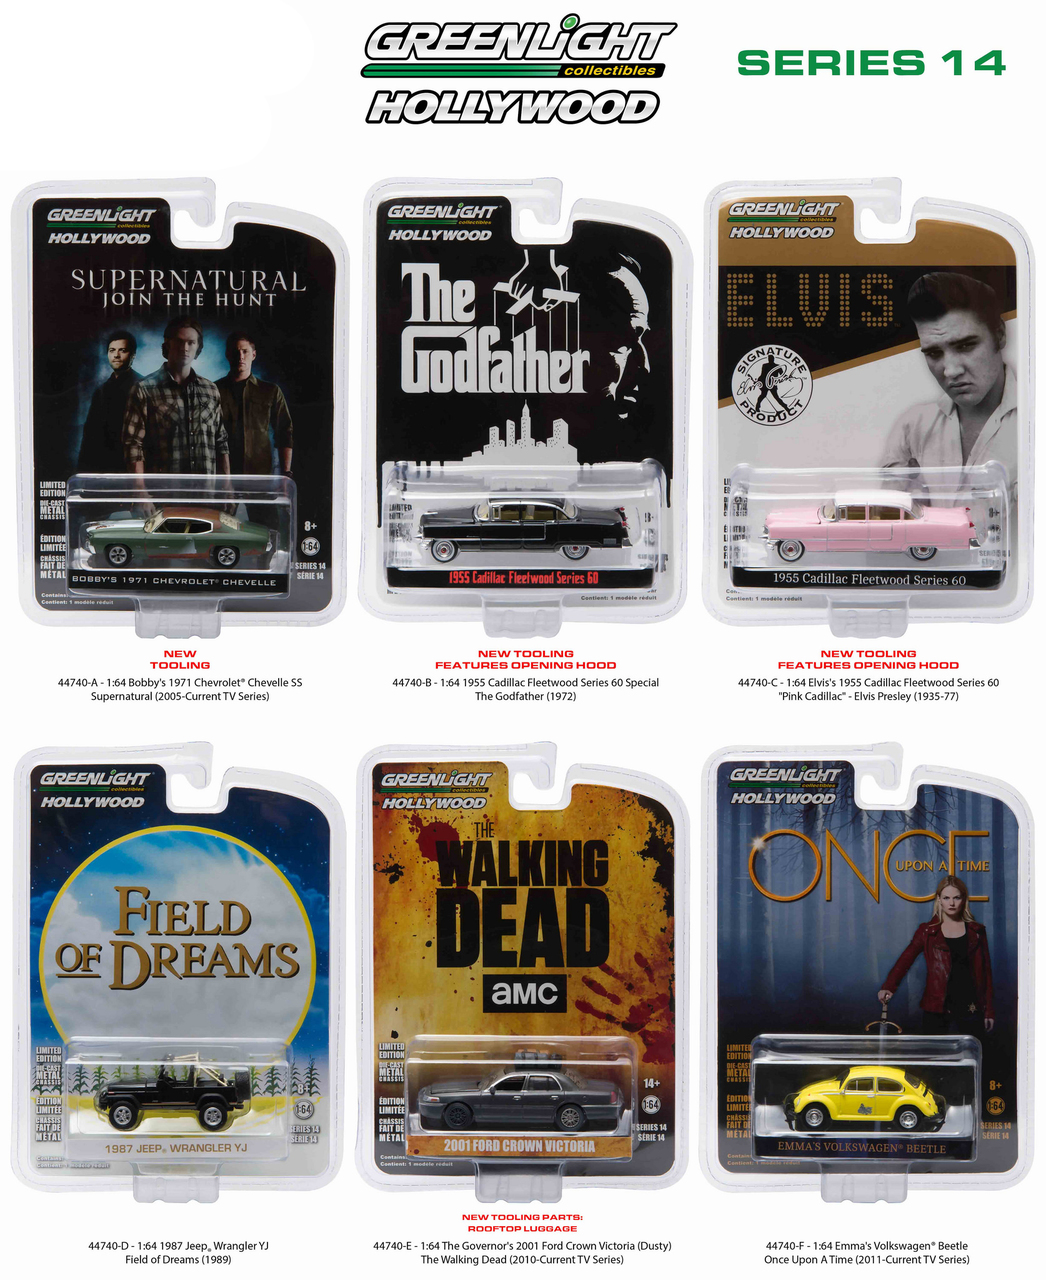 Brand new 1:64 scale diecast model car of Hollywood Series / Release 14 6pc Diecast Car Set by Greenlight.Limited Edition.Brand New Box.Has Rubber Tires.Metal Body and Chassis.Detailed Interior Exterior.Officially Licensed Product.Each Model is Packed in Individual Blister Pack.Might come with a chase car instead of one of the cars in a set but it is not guaranteed.Dimensions of Each Car is Approximately L-2 1/2 Inches Long.THIS SET INCLUDES FOLLOWING MODELS:Bobbys 1971 Chevrolet Chevelle Supernatural (Current TV Series)1955 Cadillac Fleetwood Series 60 Special The Godfather (1972)Elviss Pink 1955 Cadillac Fleetwood Series 60 Elvis Presley (1935-77)1987 Jeep Wrangler YJ Field of Dreams (1989)The Governors 2001 Ford Crown Vic The Walking Dea